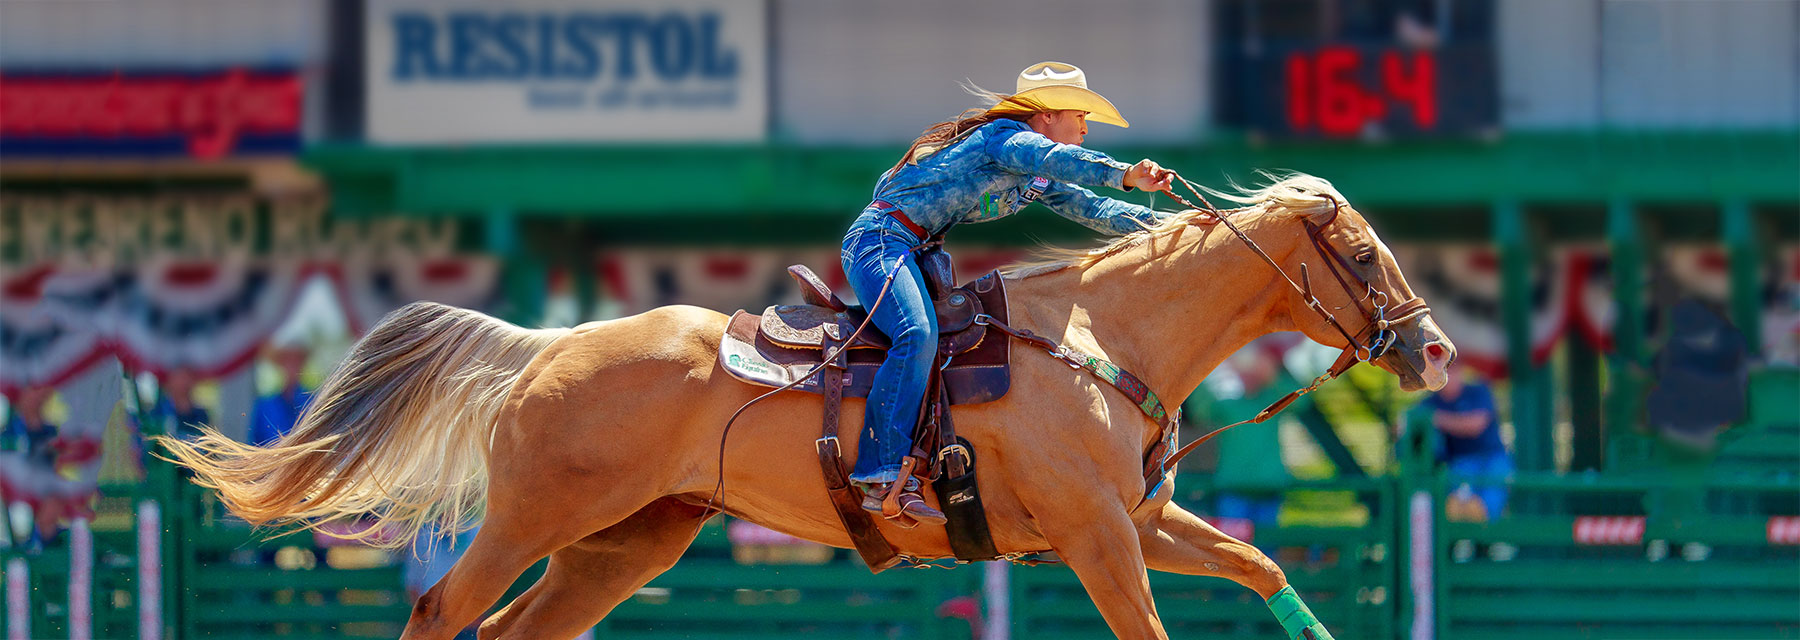 How To Lose Money With Barrel Racing Events Guide